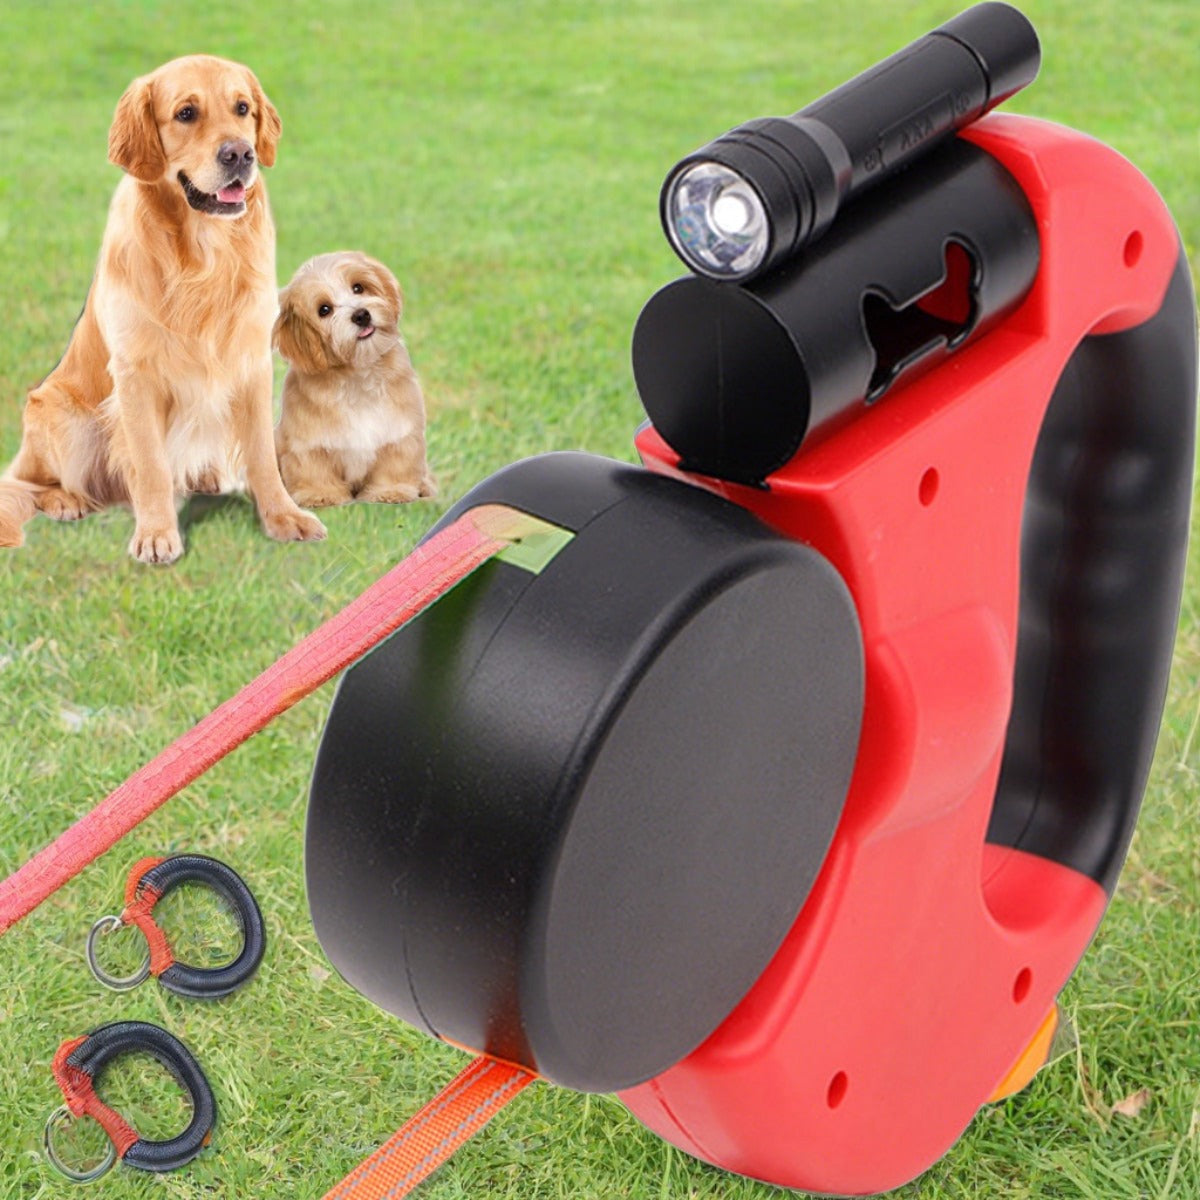 The FURR-fect Double Dog Leash with Flashlight